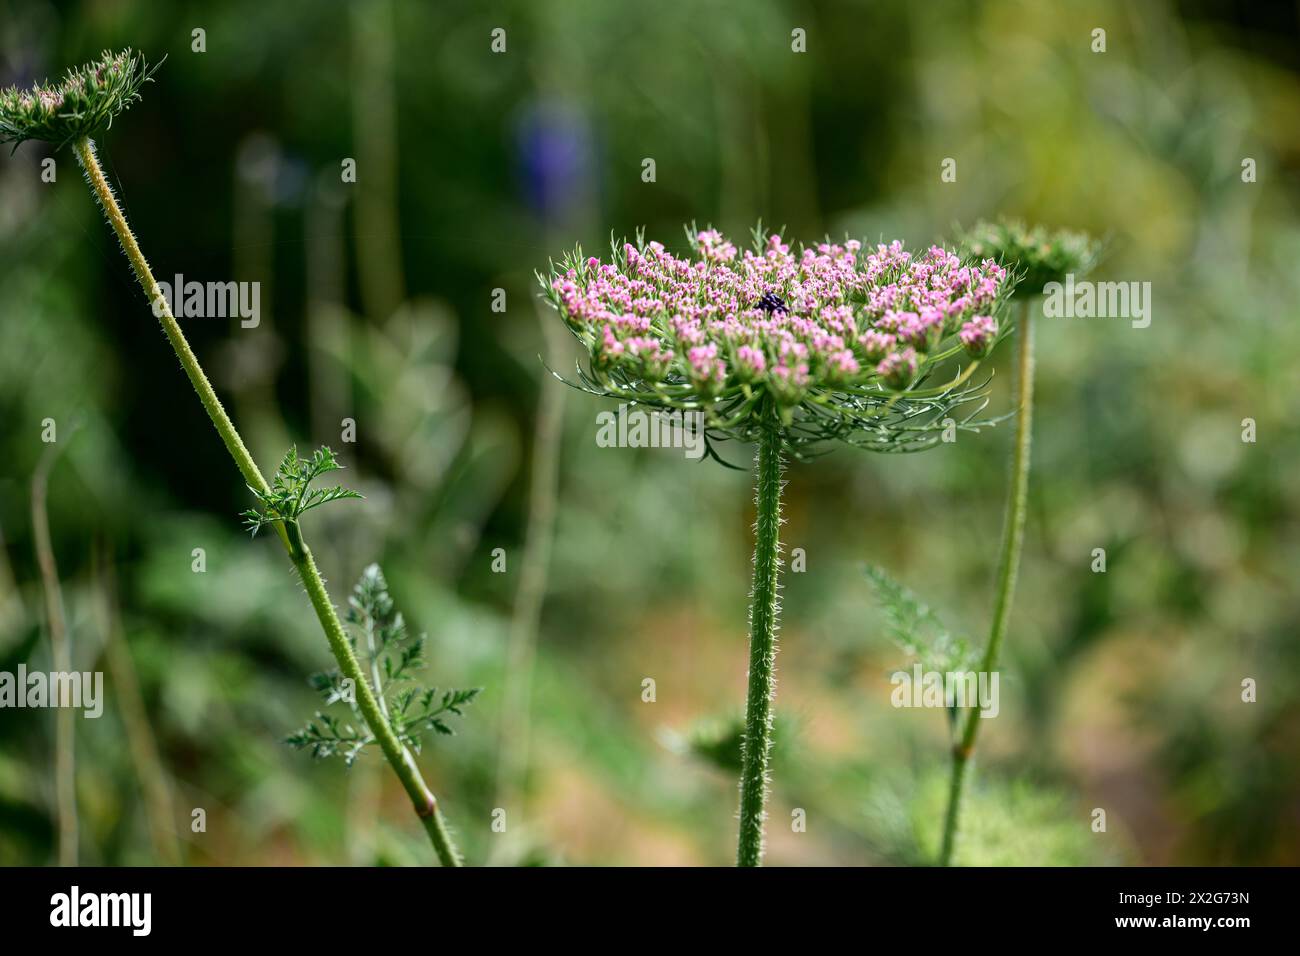 Daucus carota (common names include wild carrot, bird's nest, bishop's lace, and Queen Anne's lace). Photographed in the Lower Galilee, Israel in Marc Stock Photo